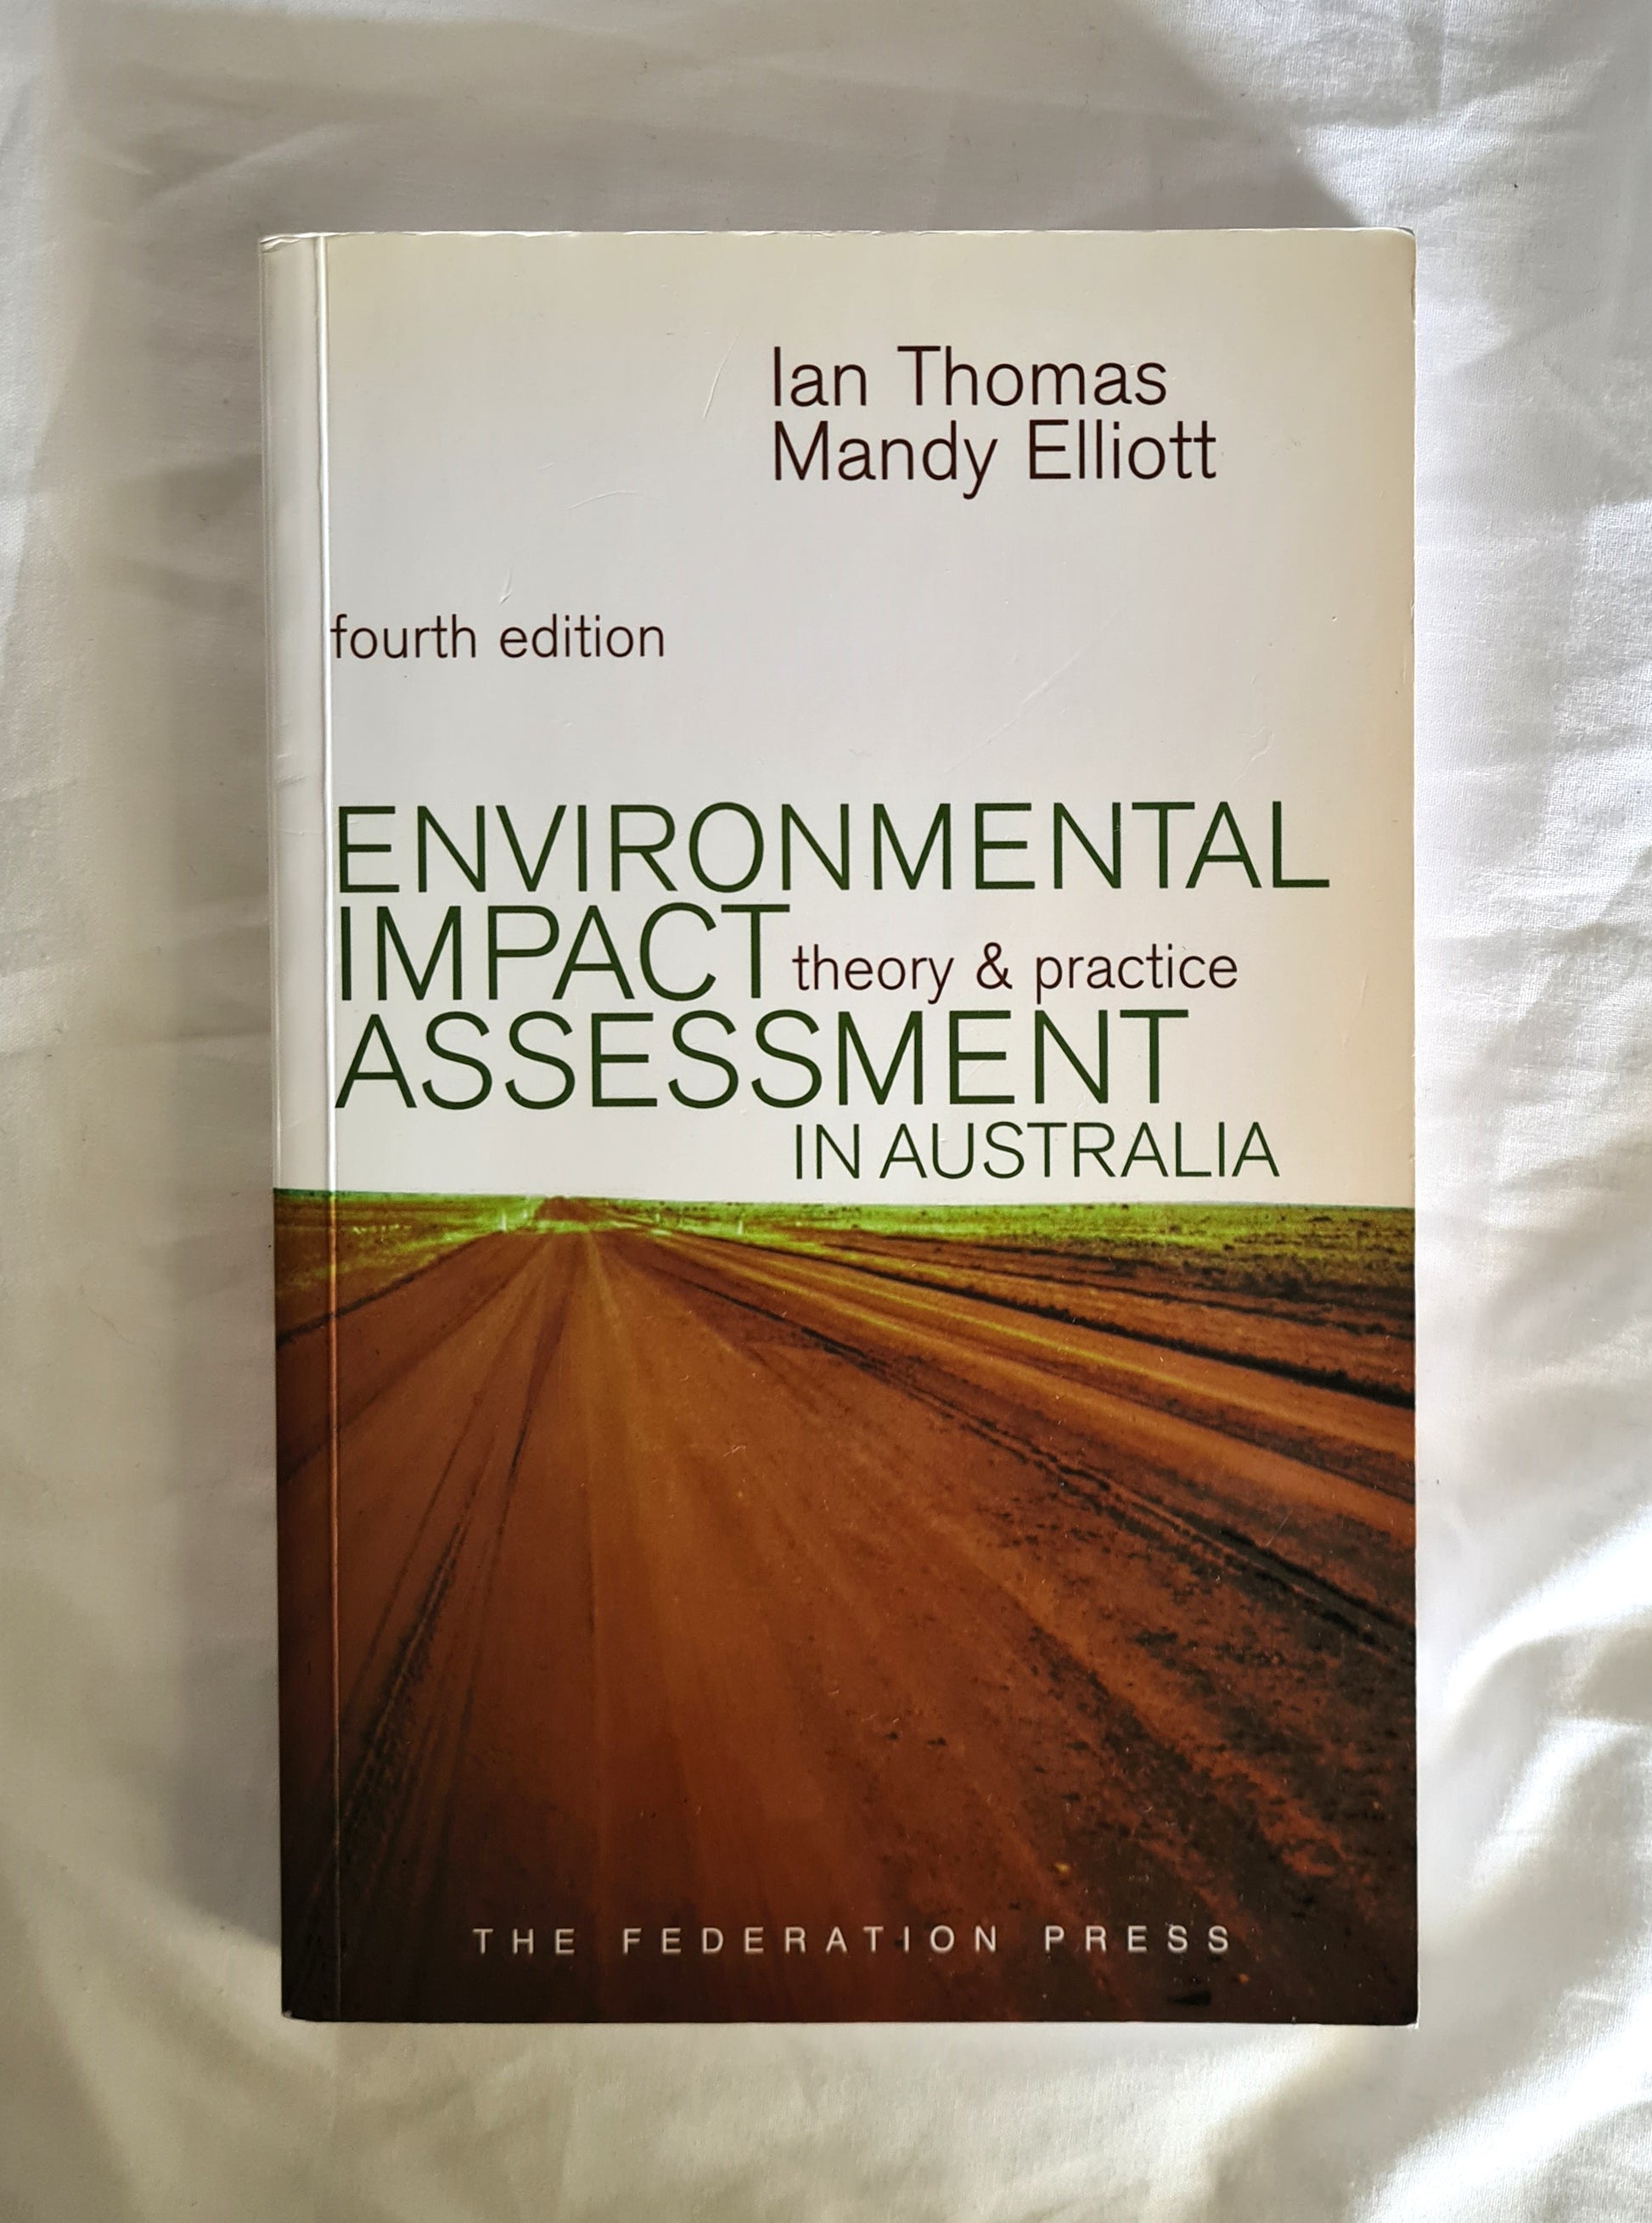 Environmental Impact Assessment in Australia  Theory and Practice  by Ian Thomas and Mandy Elliot